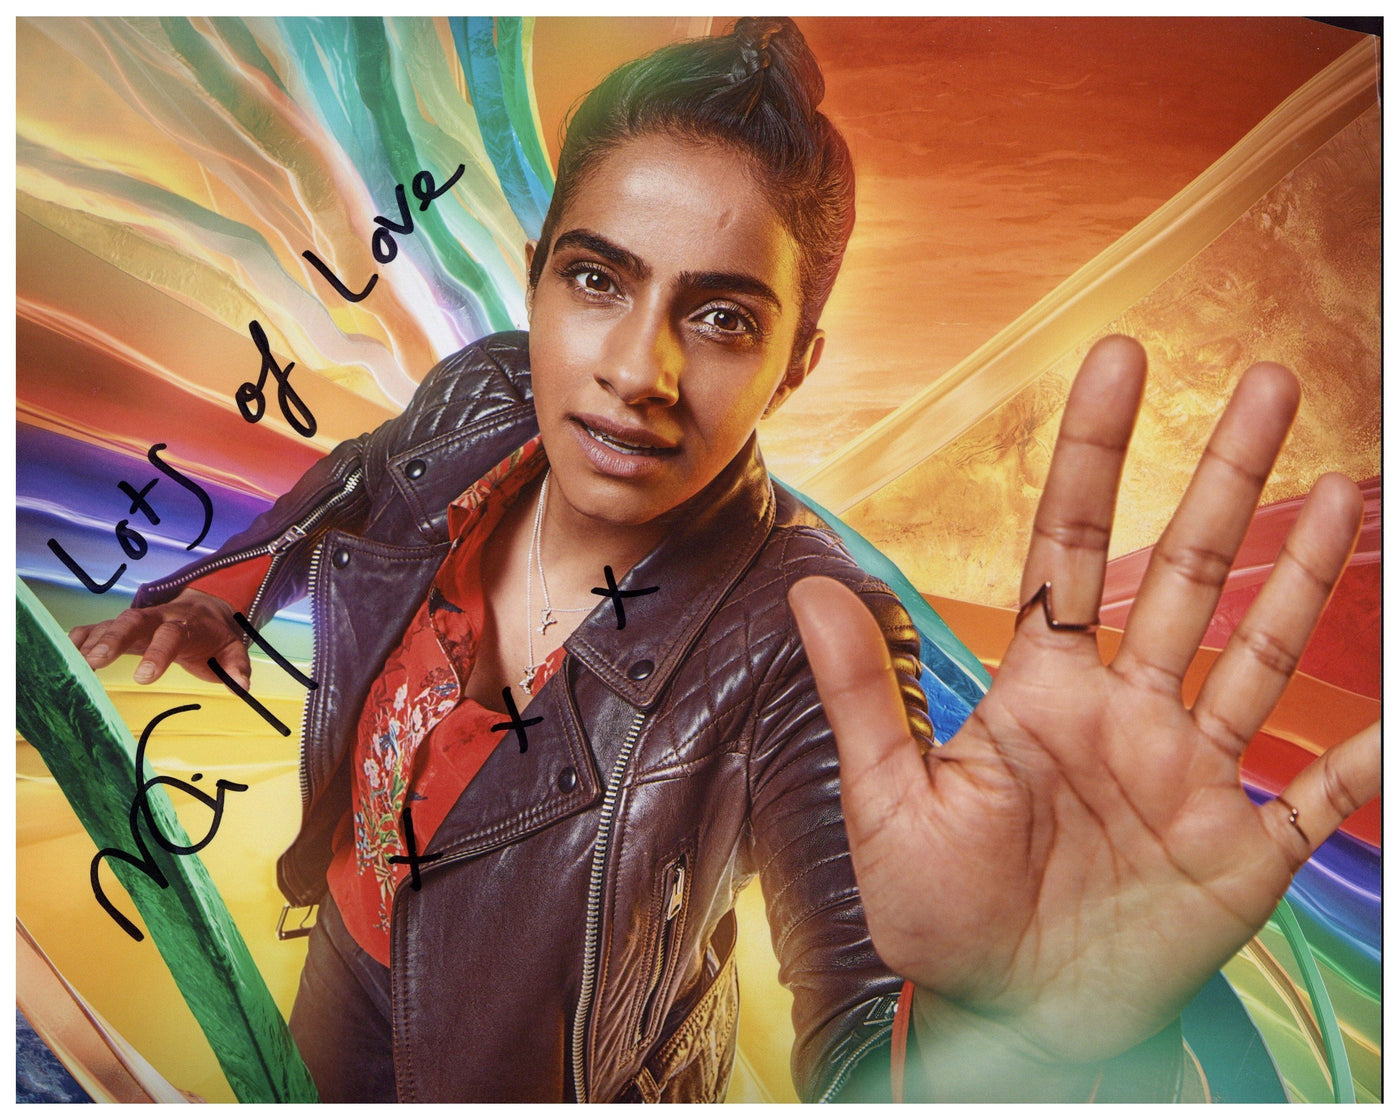 Mandip Gill Signed 8x10 Photo Dr. Who Autographed ACOA 2